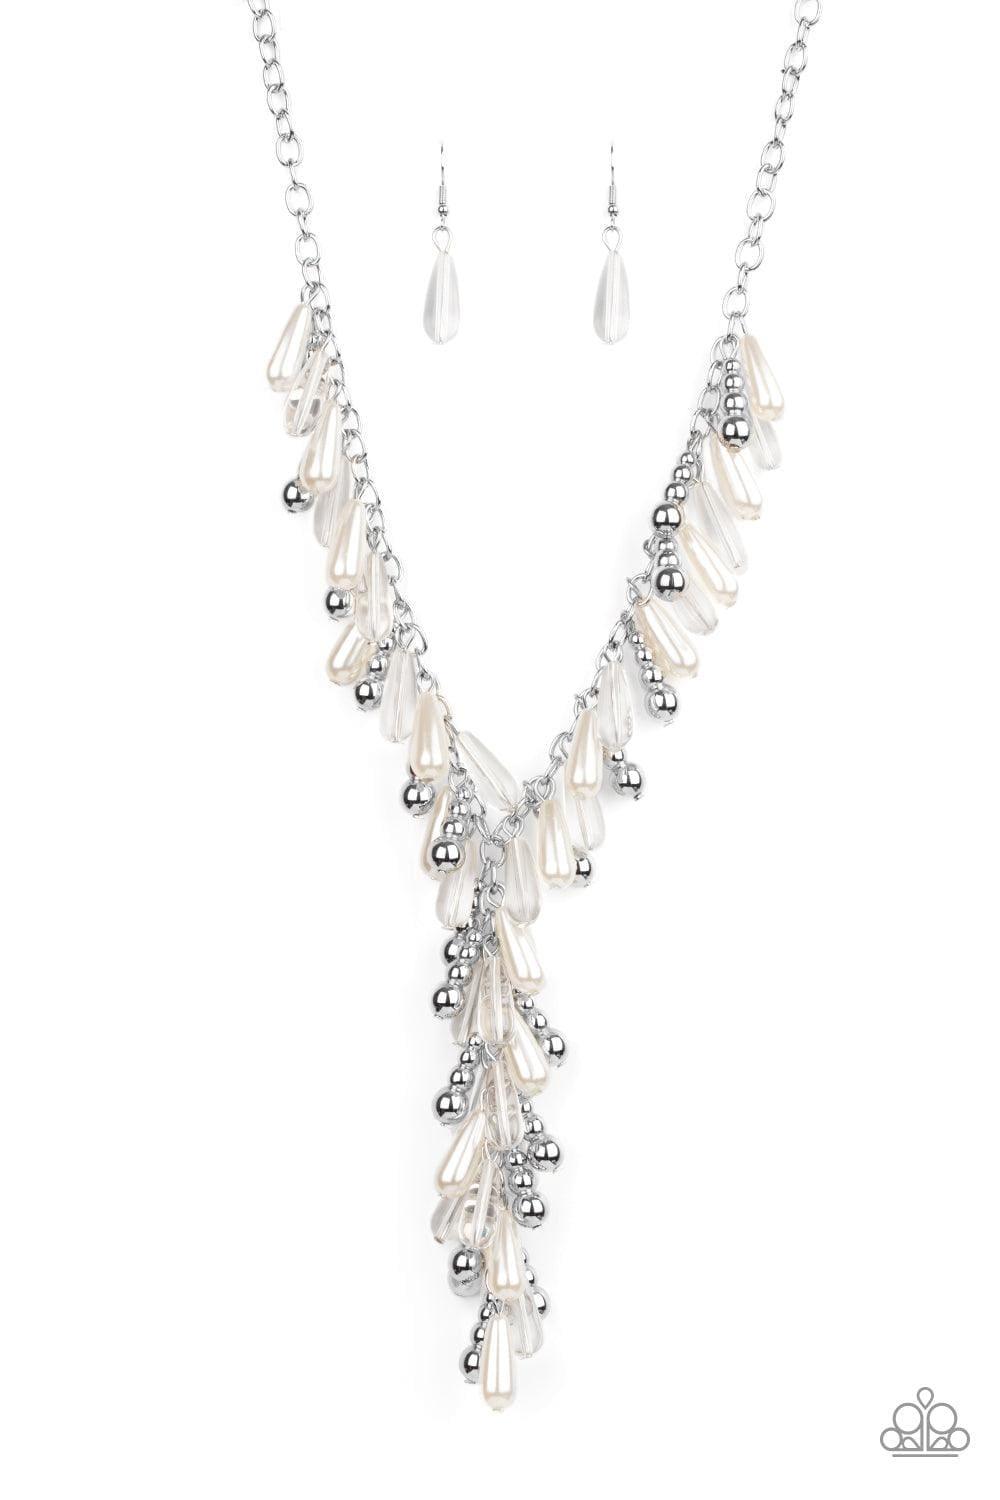 Paparazzi Accessories - Dripping With Diva-ttitude - White Necklace - Bling by JessieK